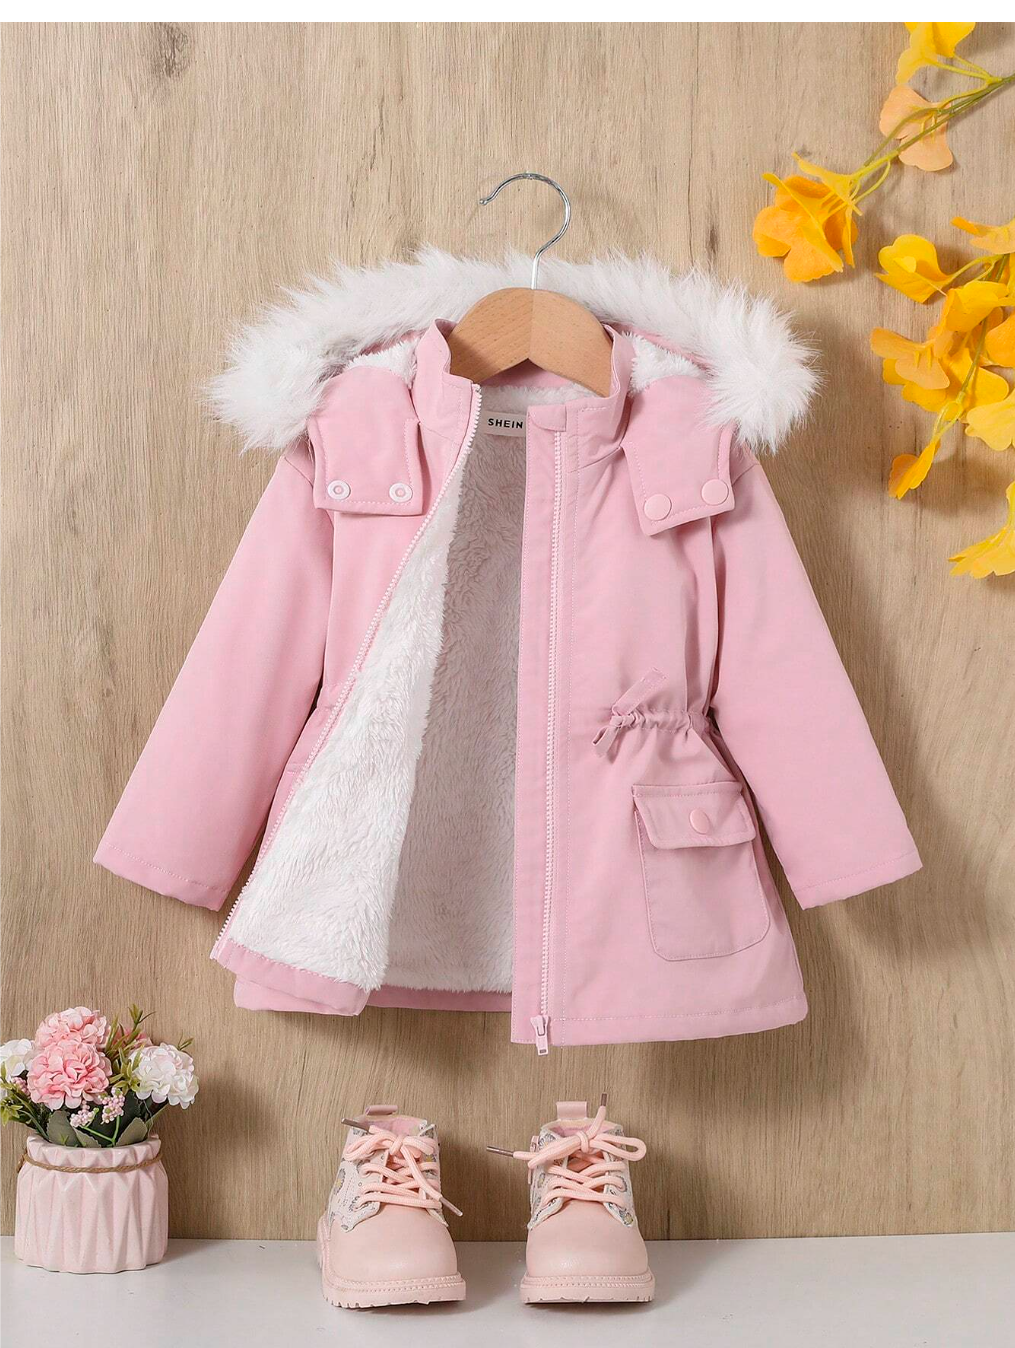 Cuddly Chic: Baby Girl's Flap Pocket Fuzzy Trim Hooded Thermal Lined Coat for Snuggly Style!